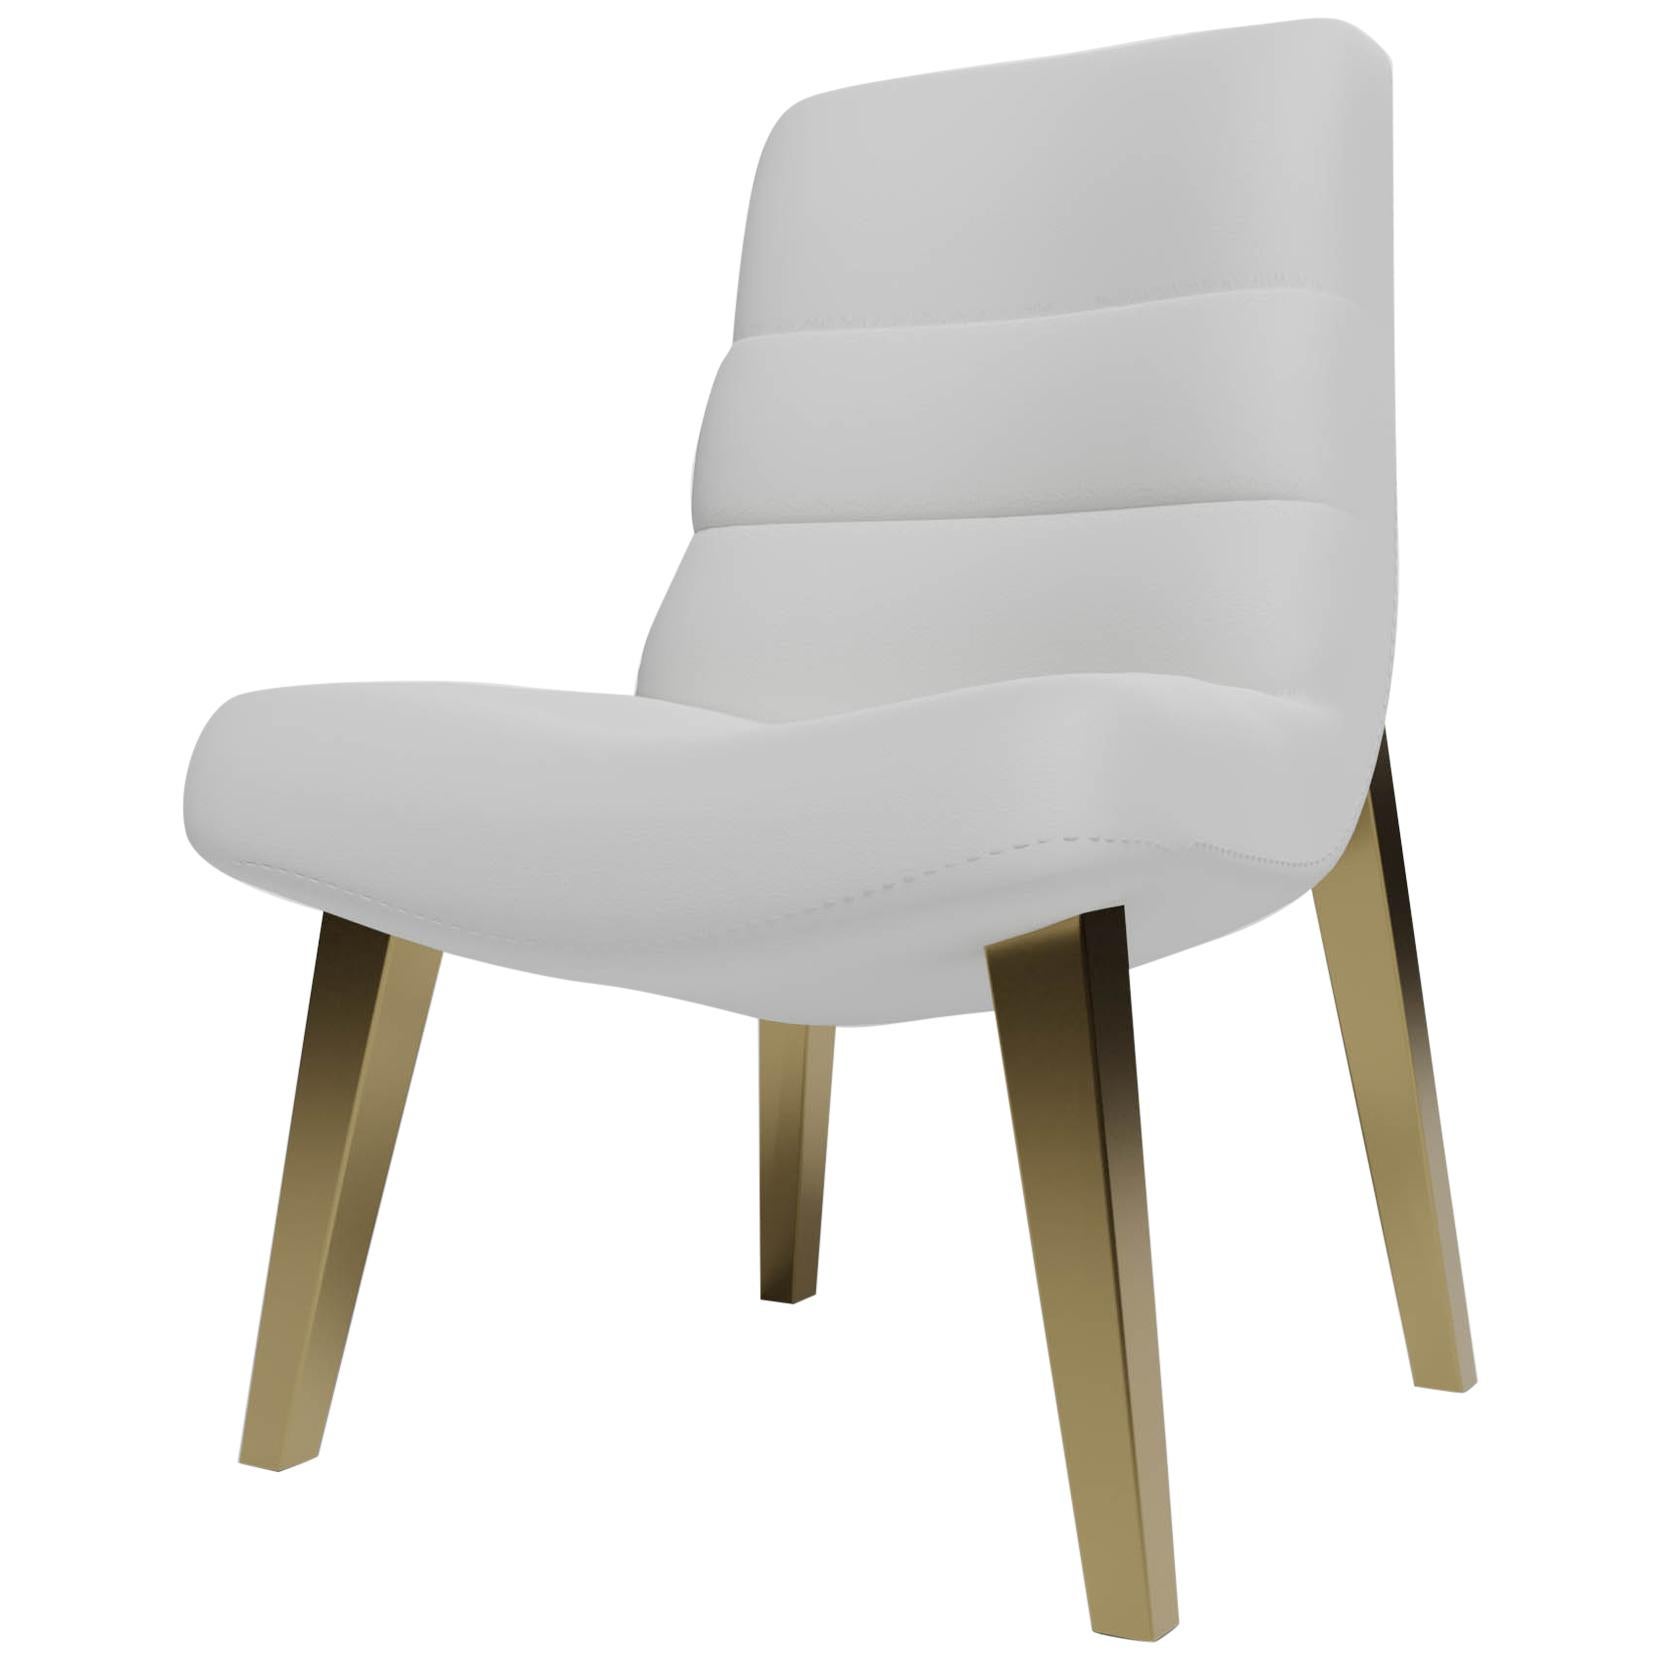 ZUMA DINING CHAIR - Modern Design in Lealpell Leather with Metallic Legs